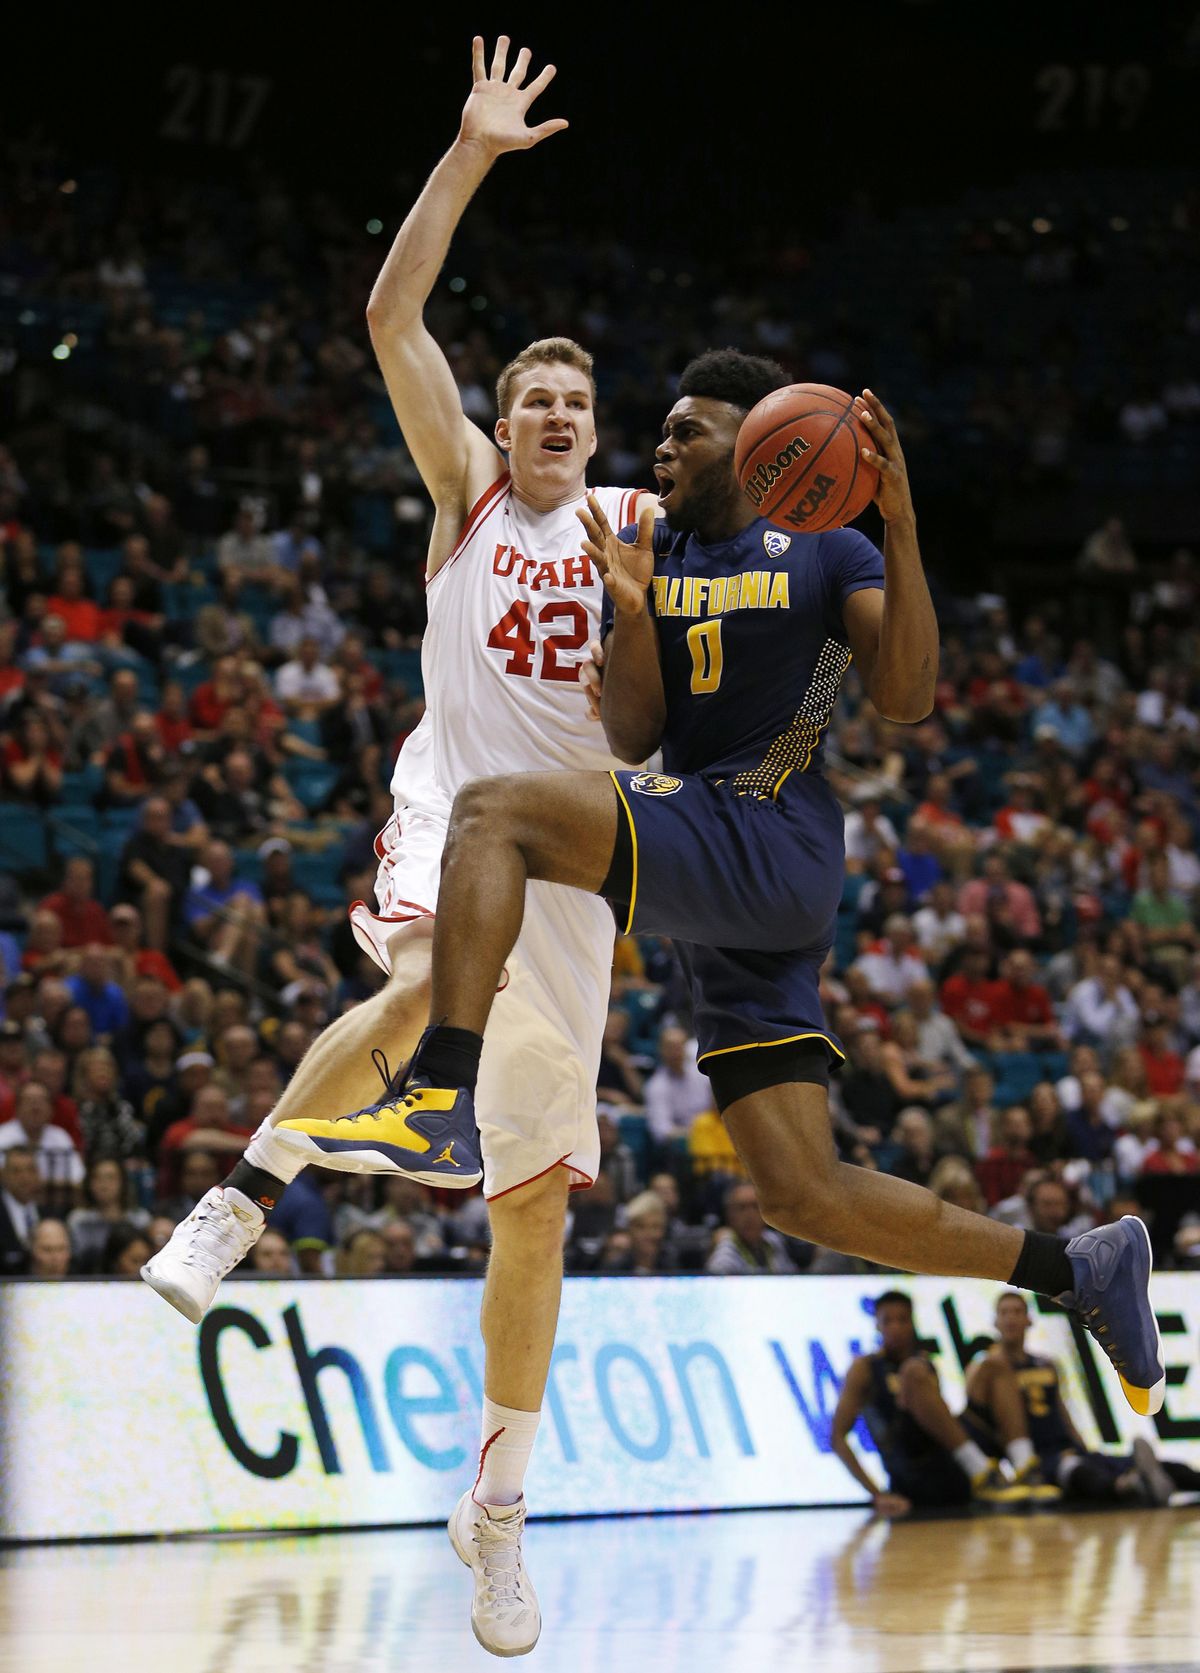 California forward Jaylen Brown, right, drives into Utah forward Jakob Poeltl during the second half of an NCAA college basketball game in the semifinal round of the Pac-12 men’s tournament Friday, March 11, 2016, in Las Vegas. Utah won 82-78 in overtime. (John Locher / Associated Press)